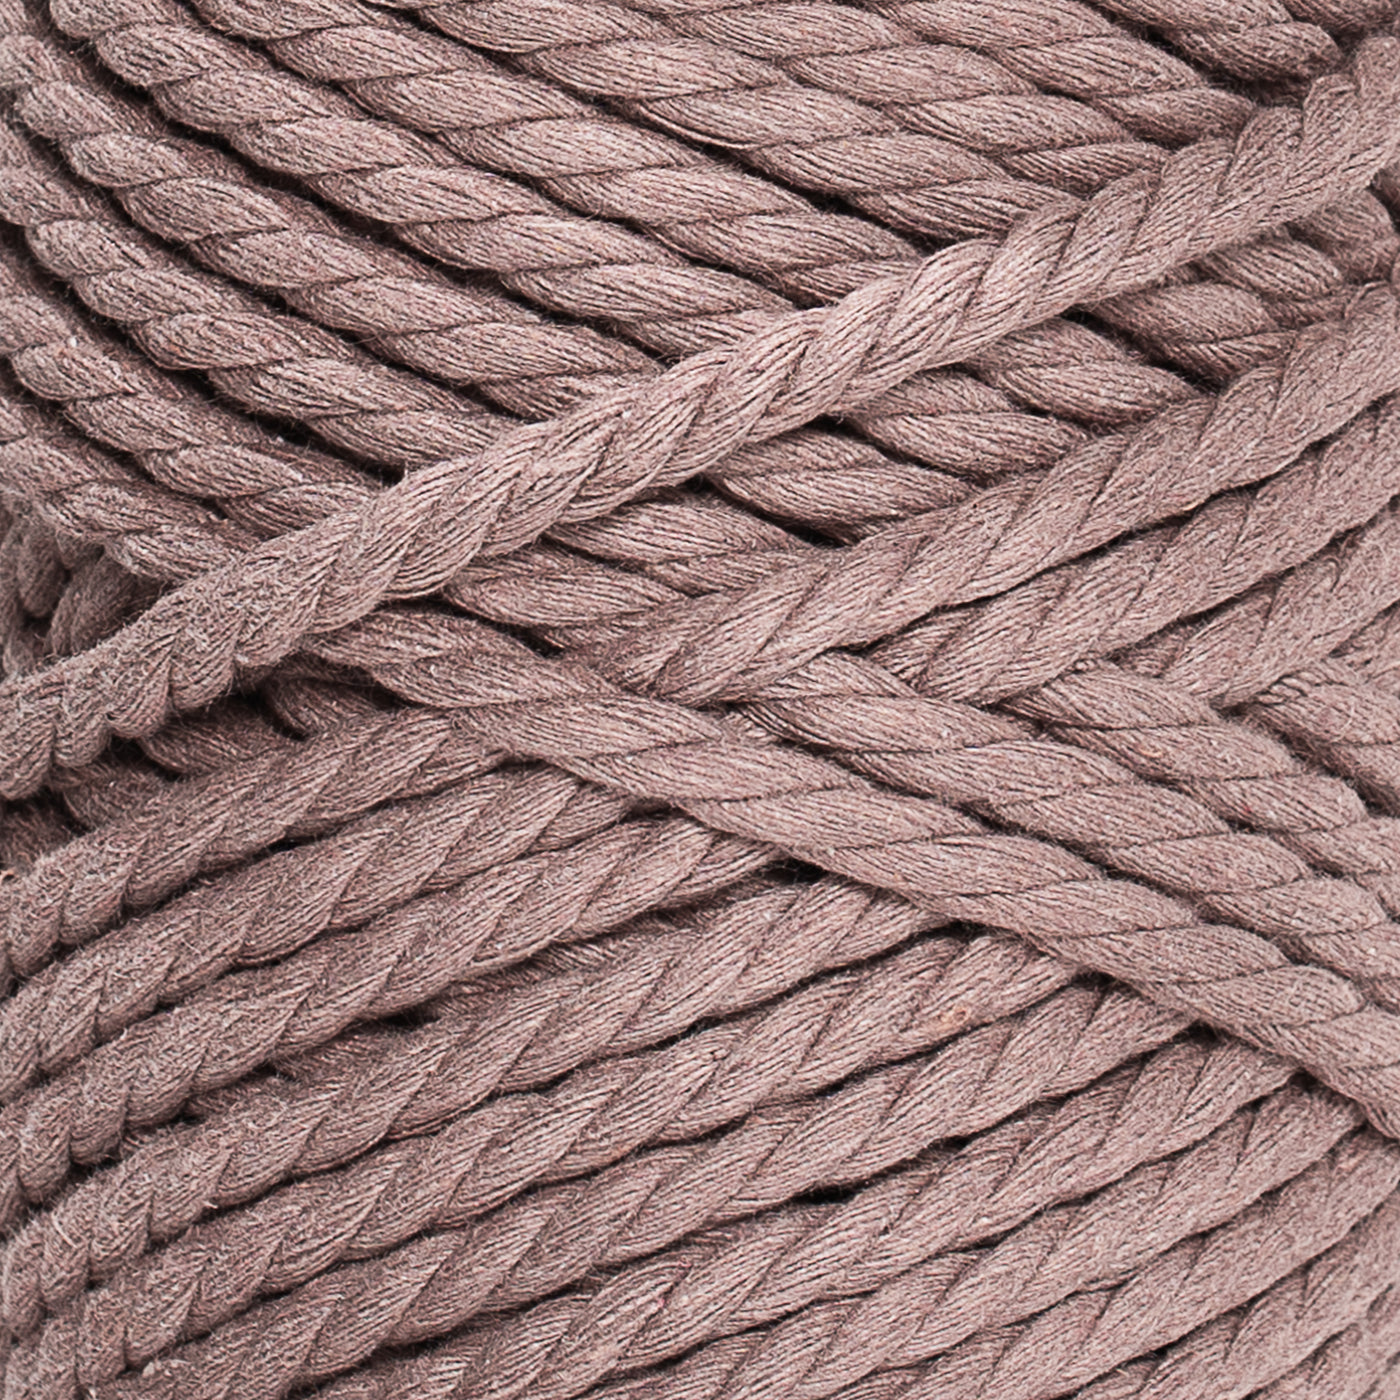 COTTON ROPE ZERO WASTE 5 MM - 3 PLY - MINK COLOR